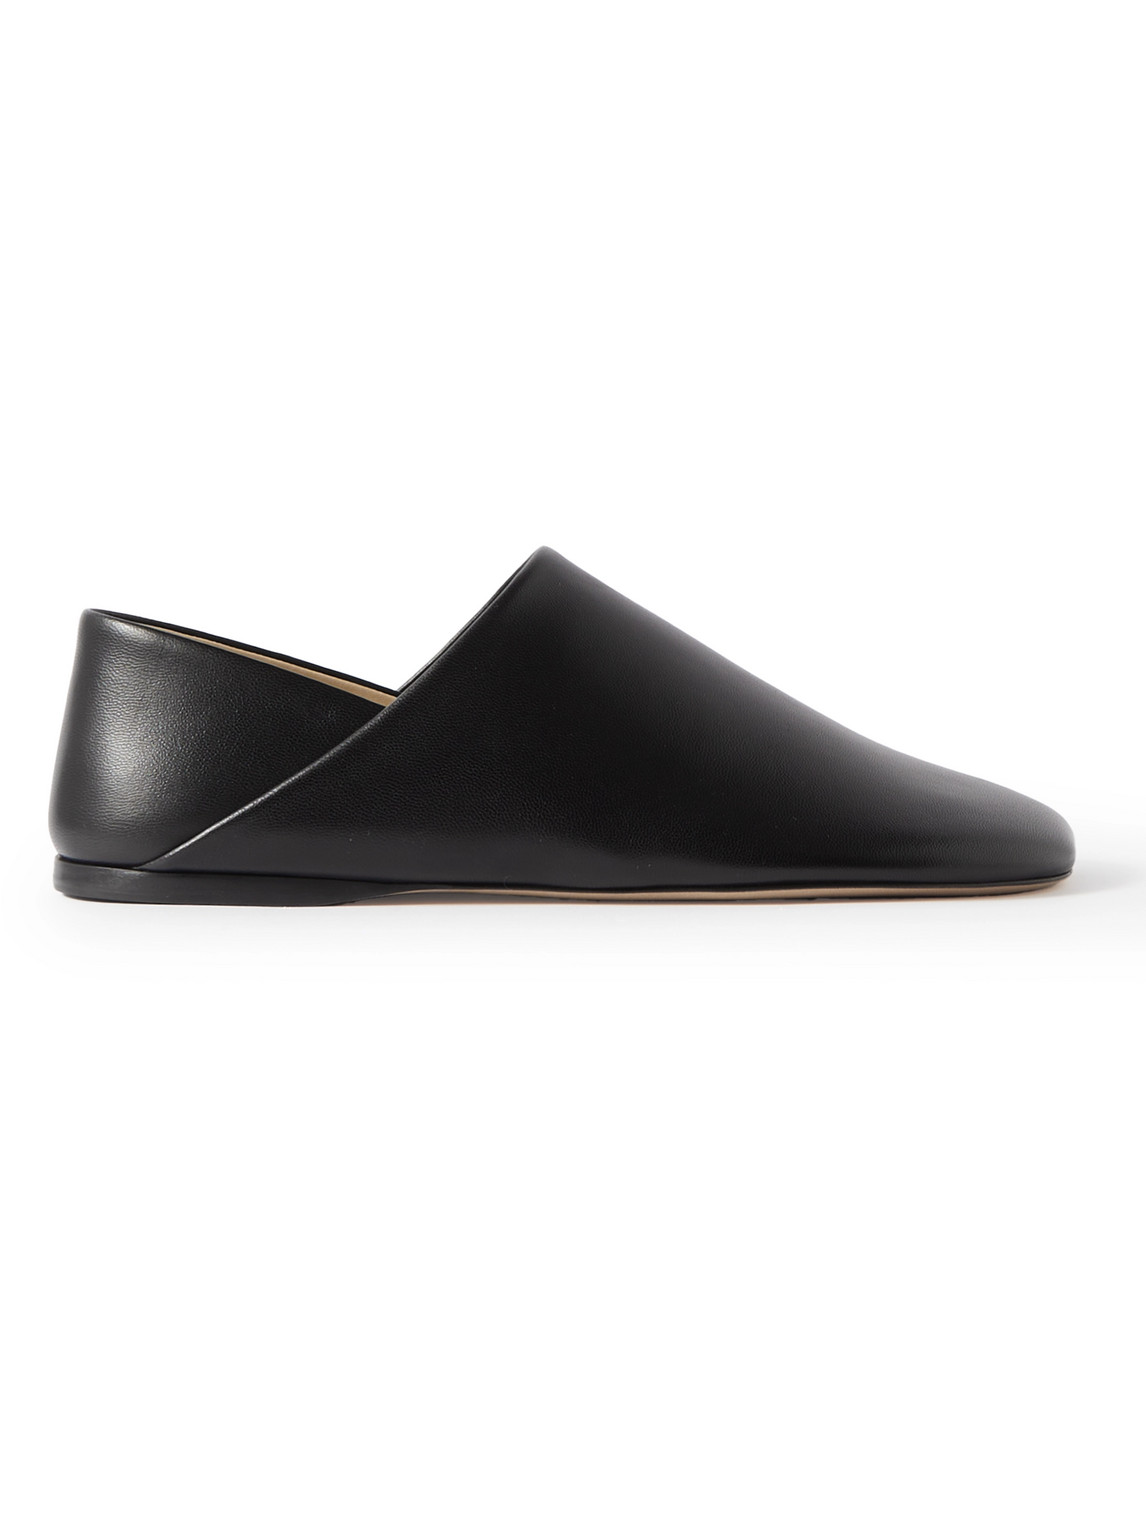 LOEWE TOY COLLAPSIBLE-HEEL LEATHER SLIPPERS